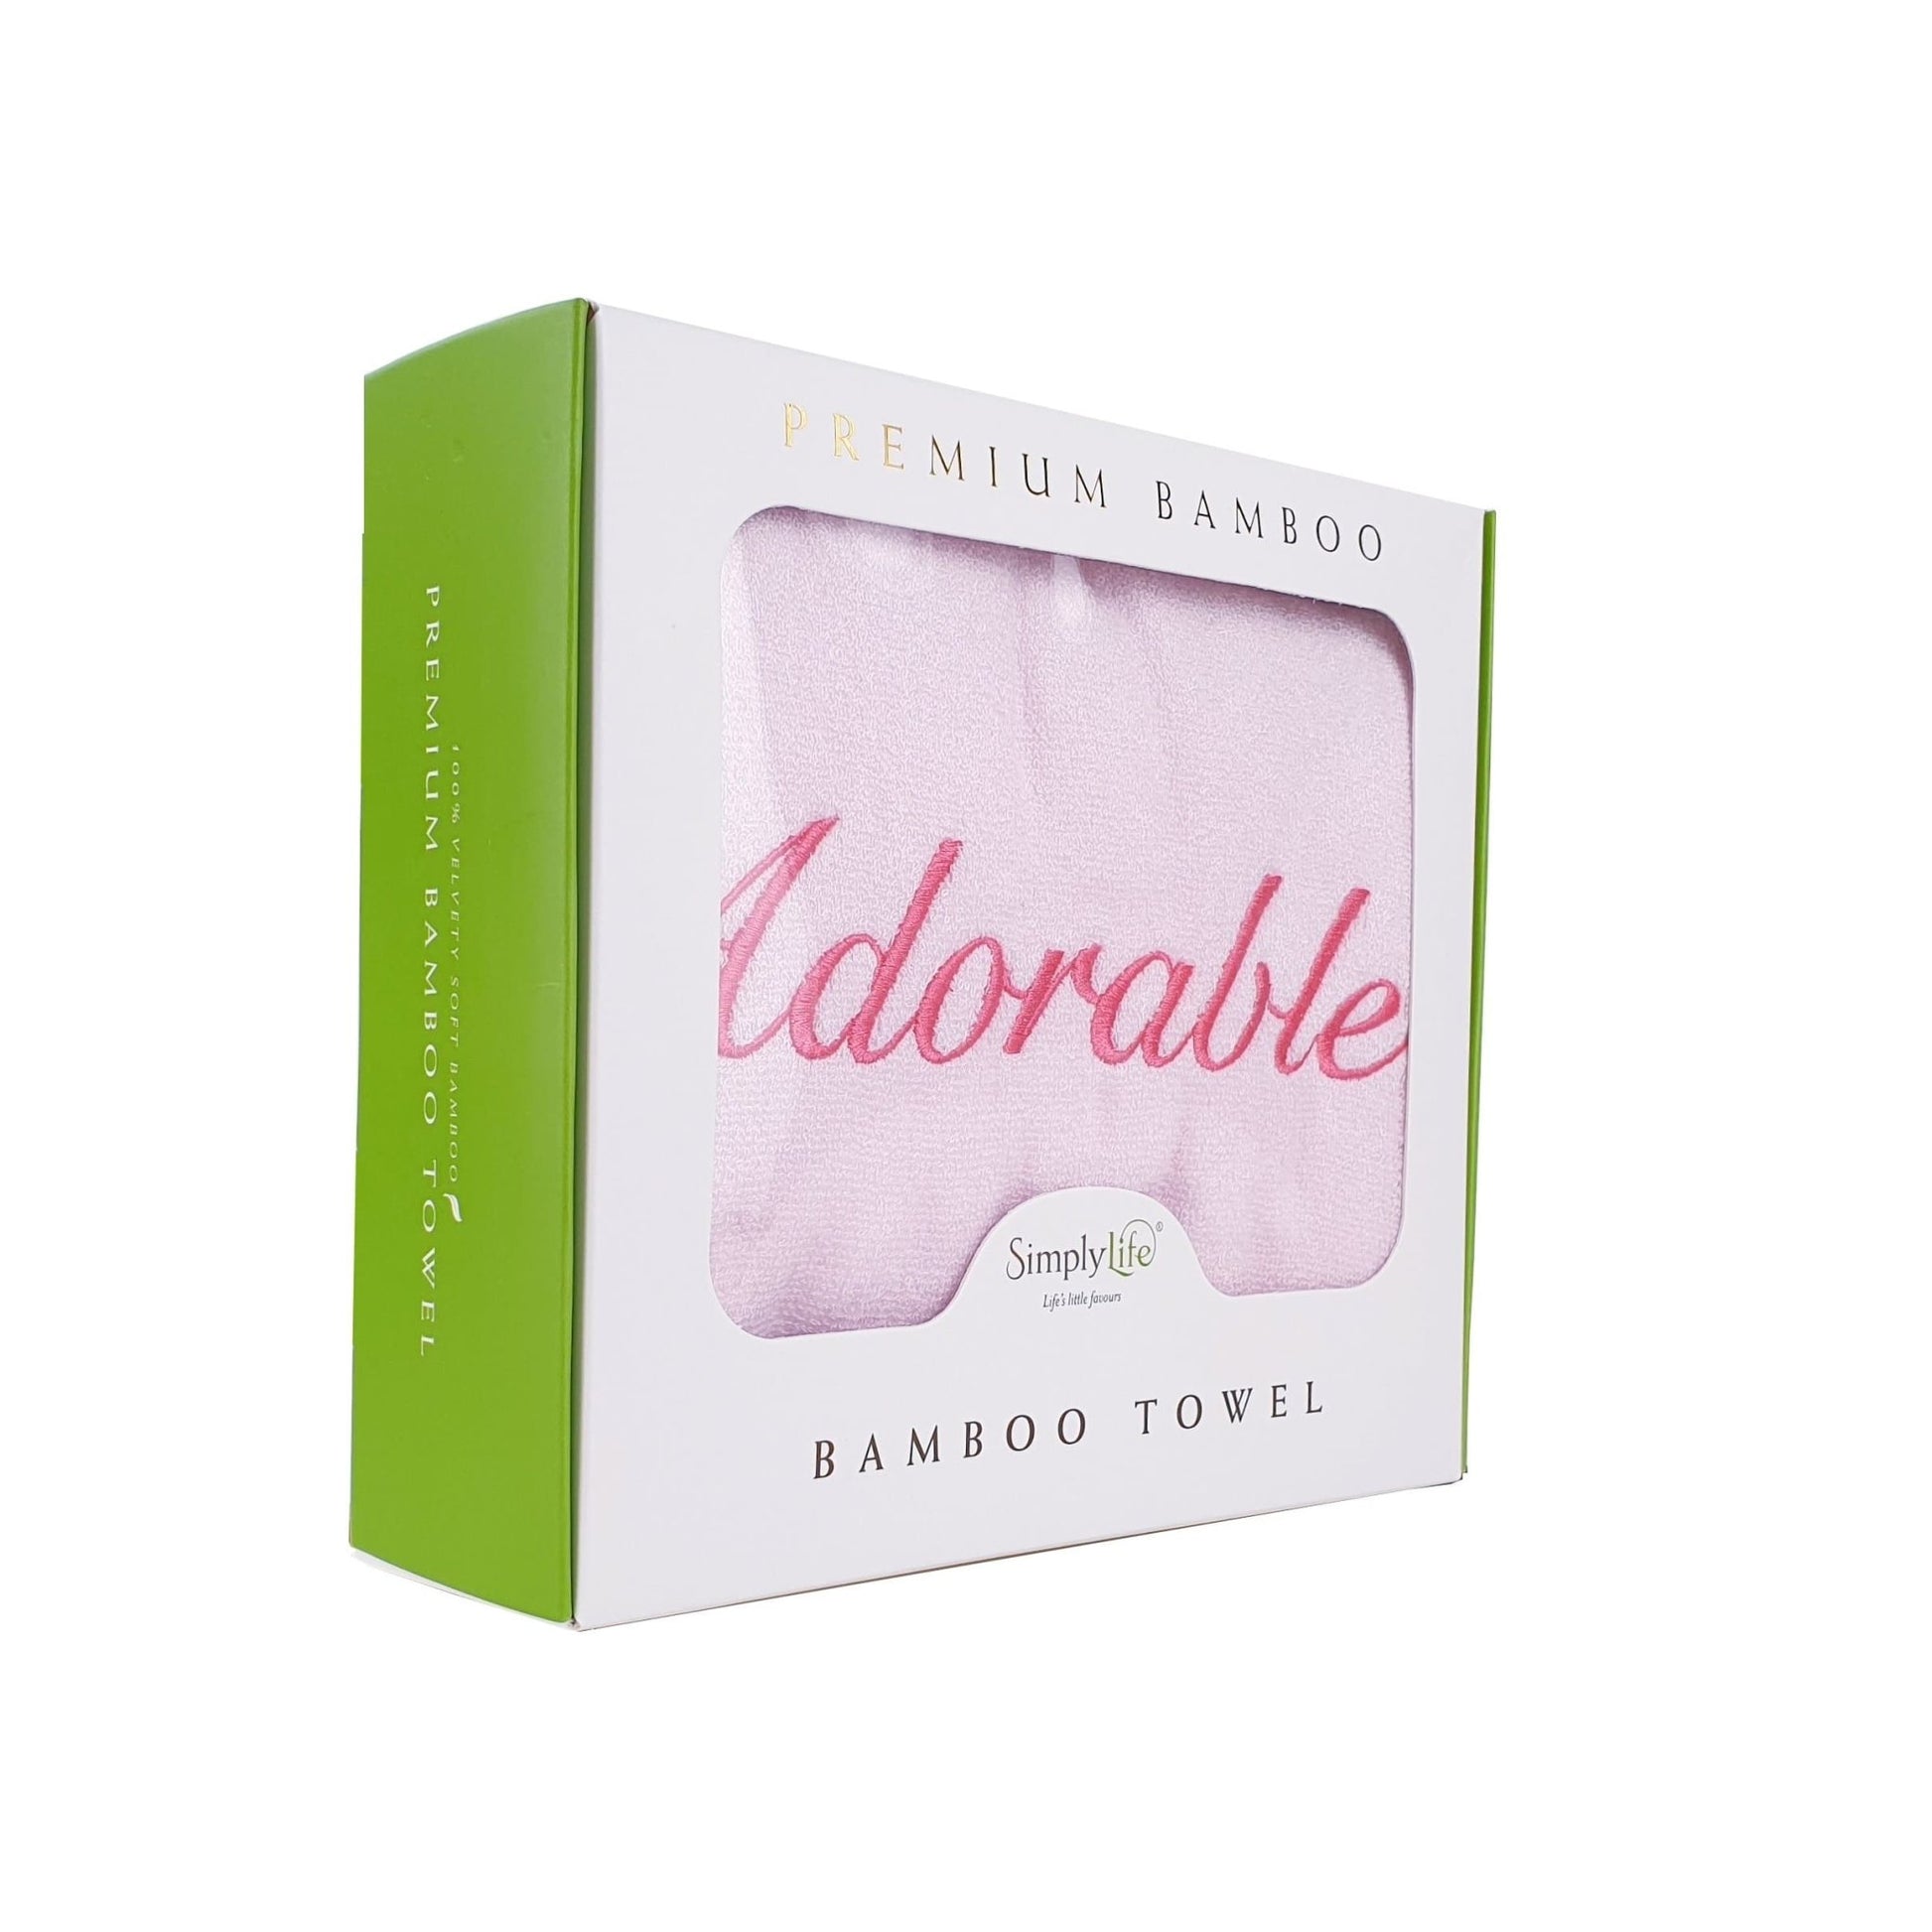 Adorable - Embroidered Premium Bamboo Towel (120x60 cm), Pink - Simply Life